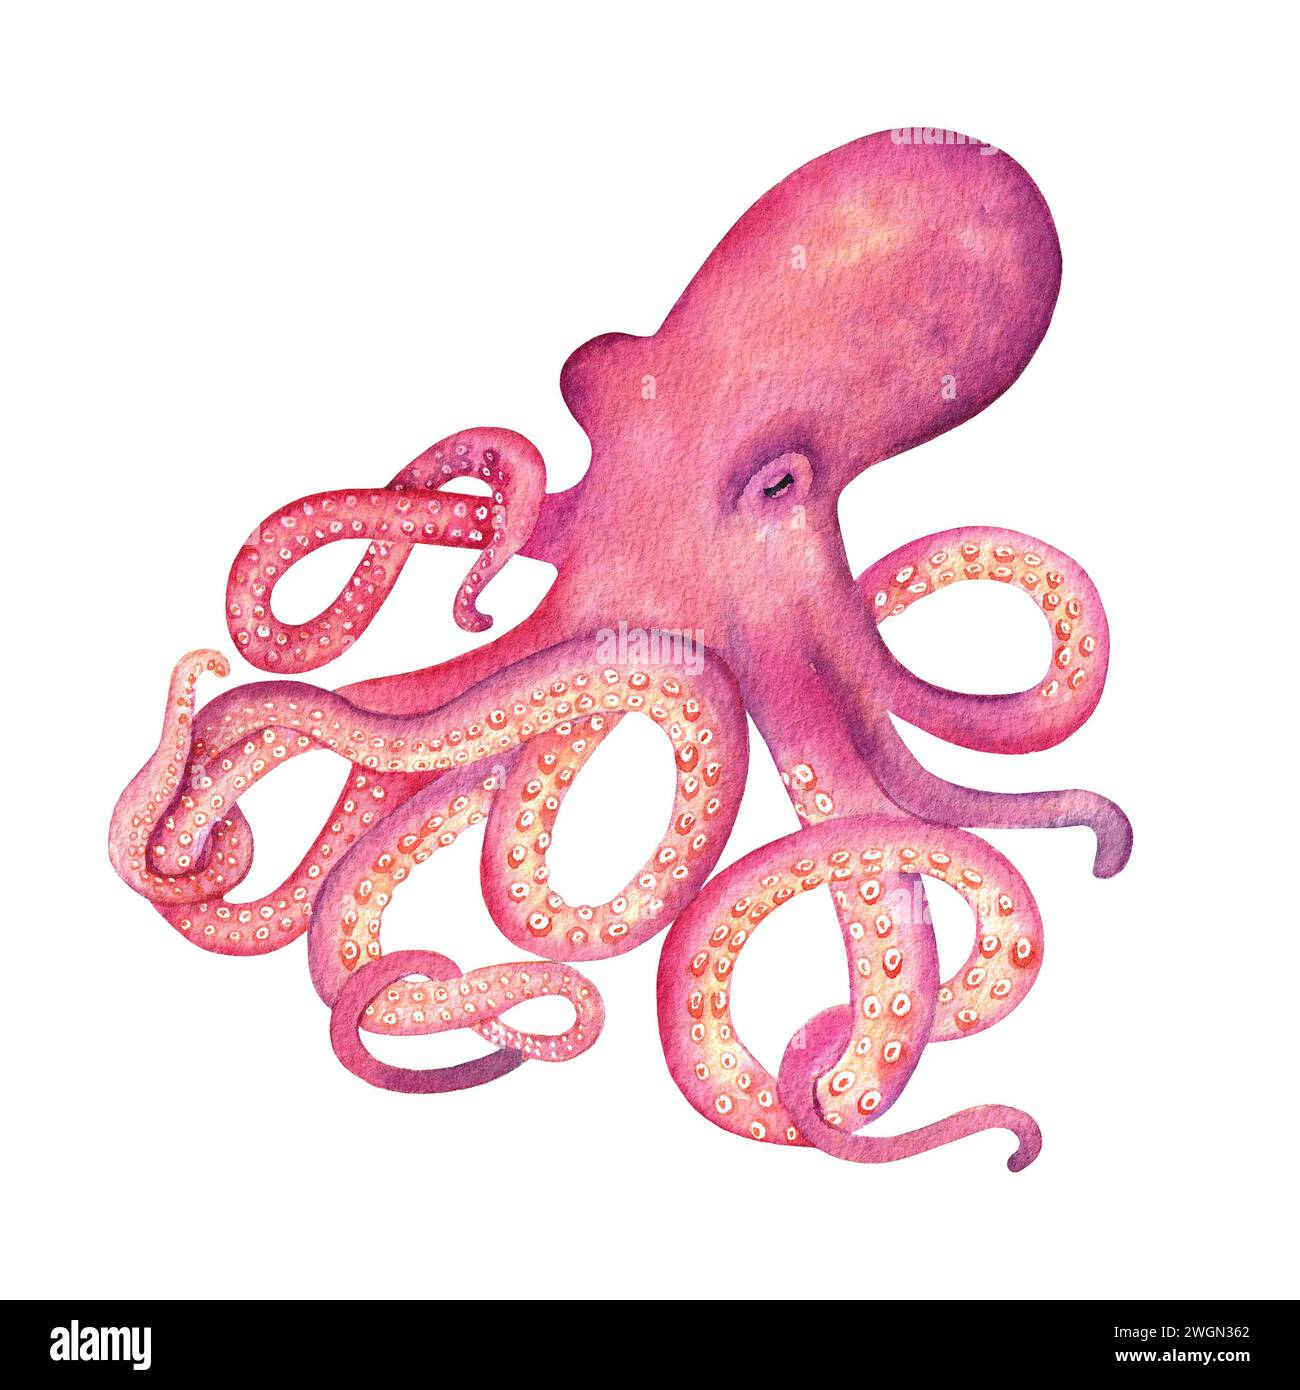 Watercolor pink octopus on the white background. Hand drawn illustration. Undersea animal Stock Photo